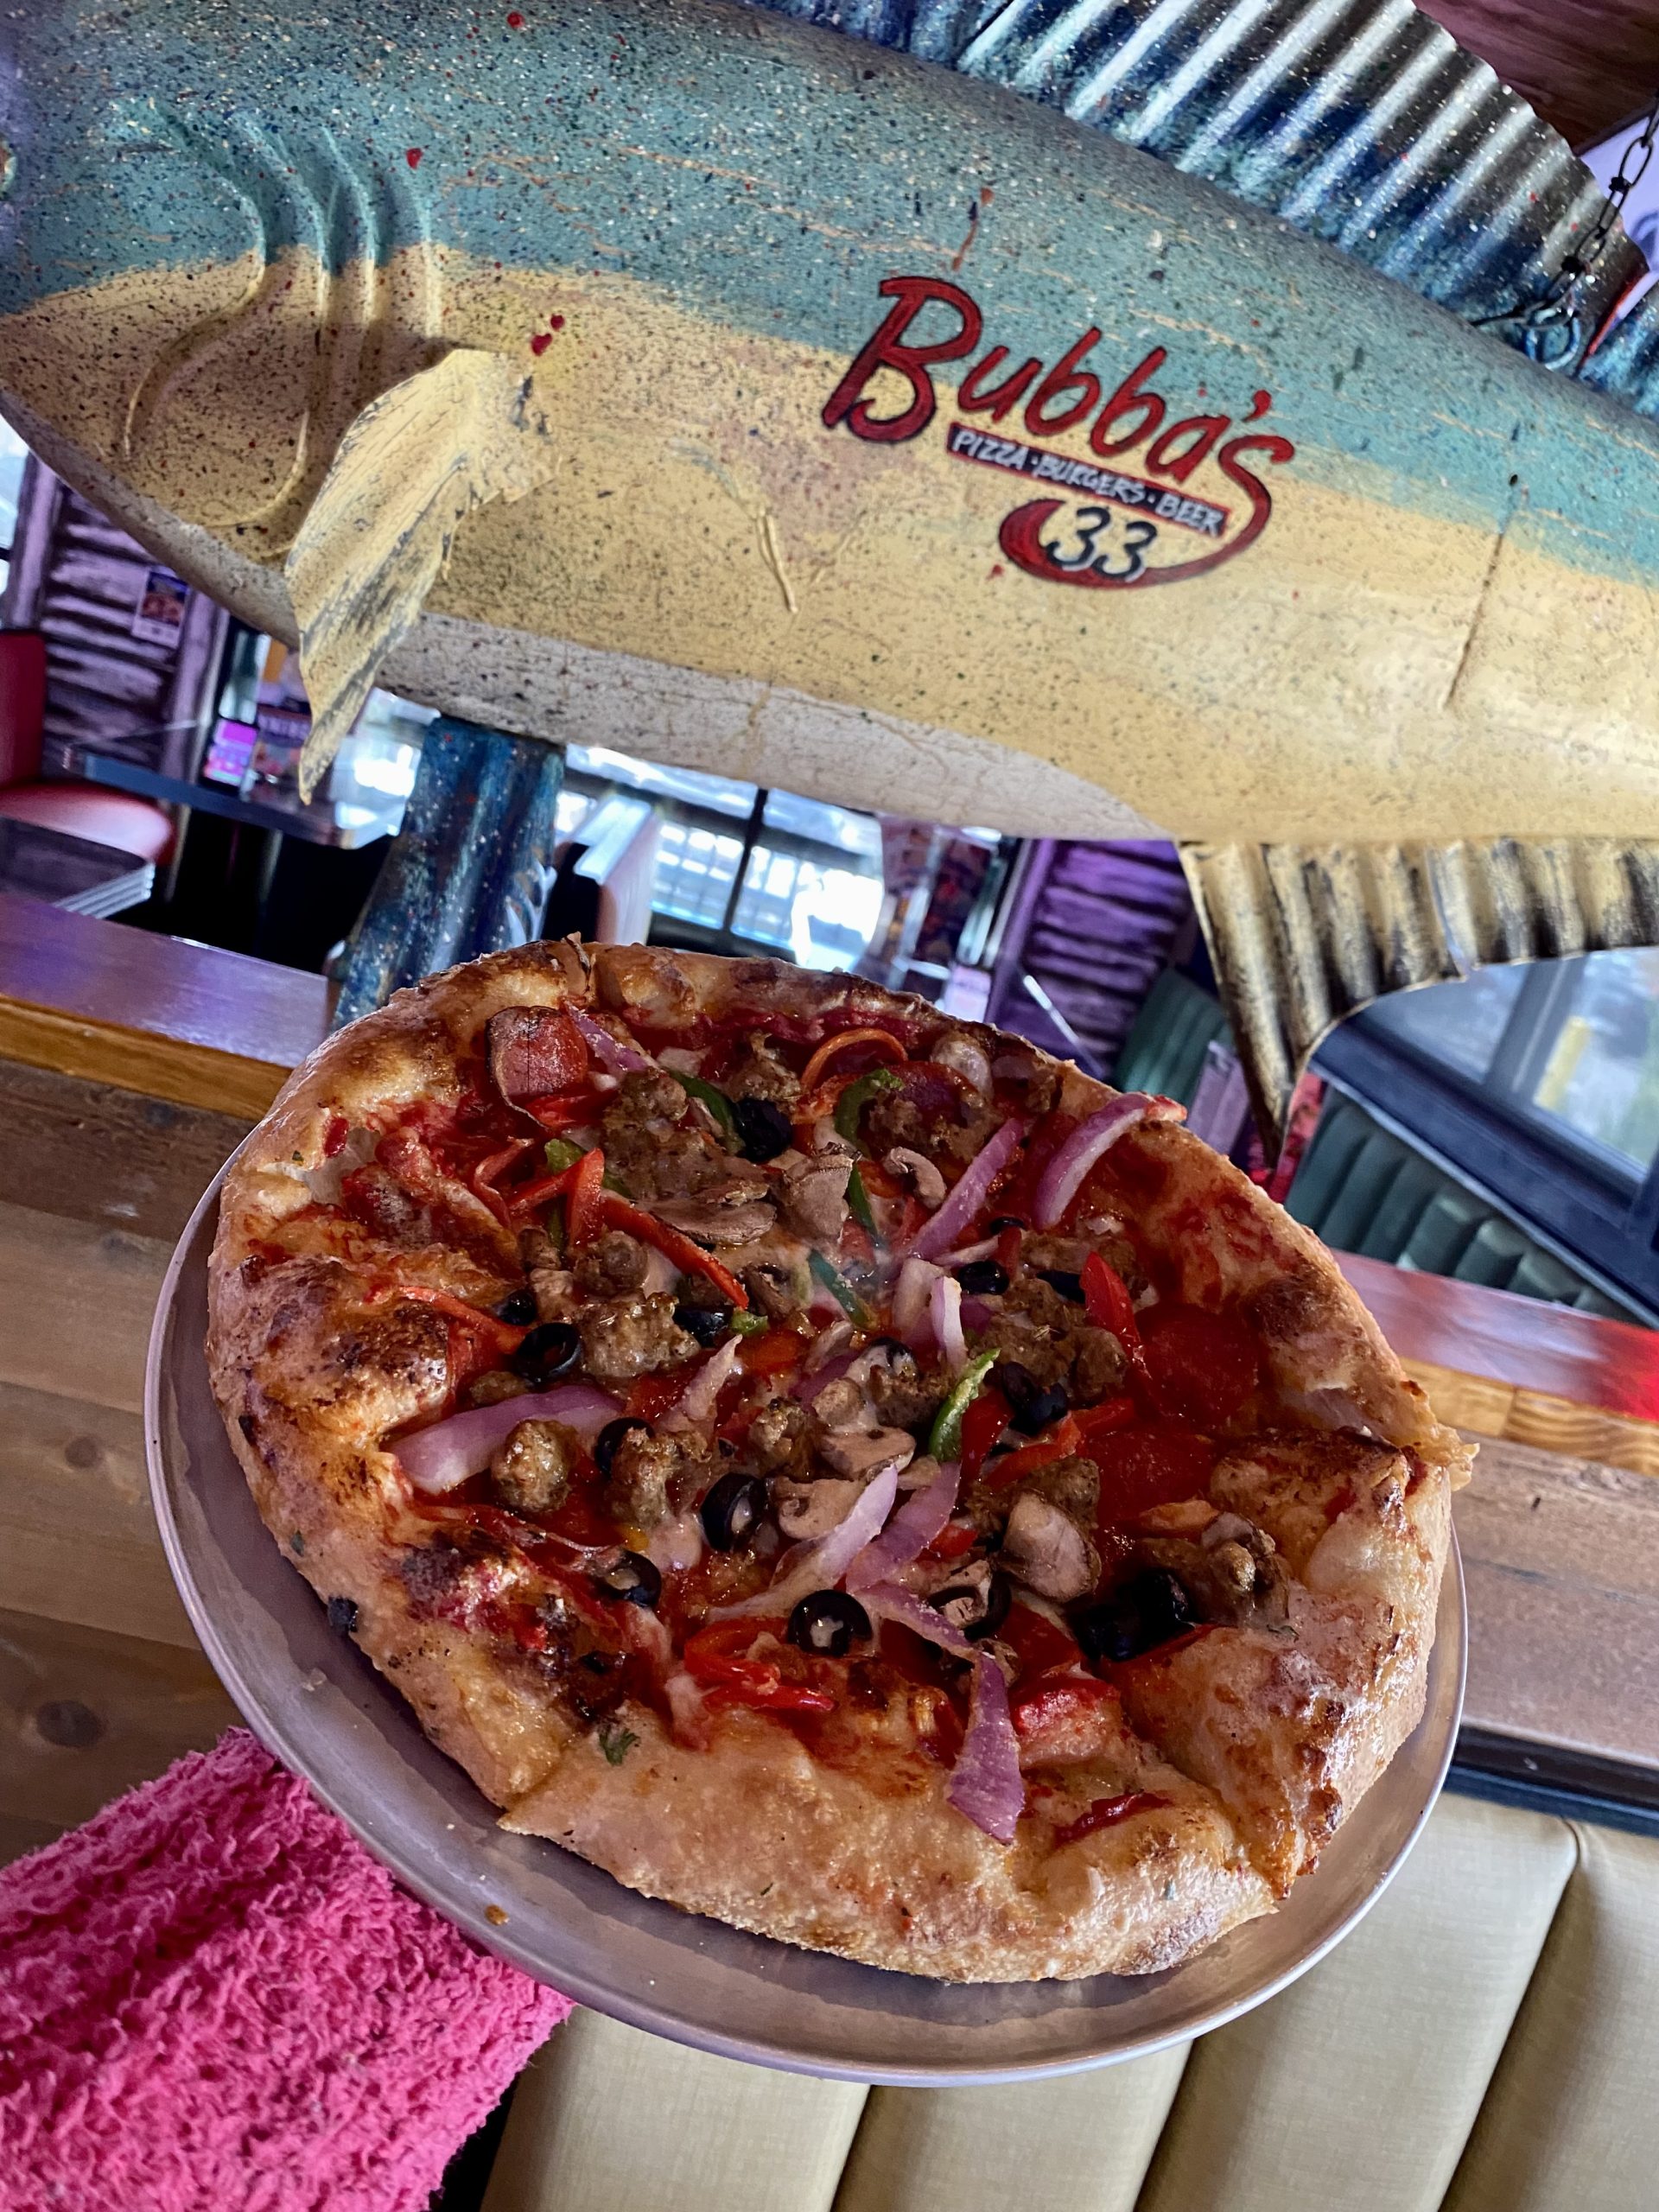 Five Things I Liked On The Menu At Bubba’s 33 In Buford, Ga